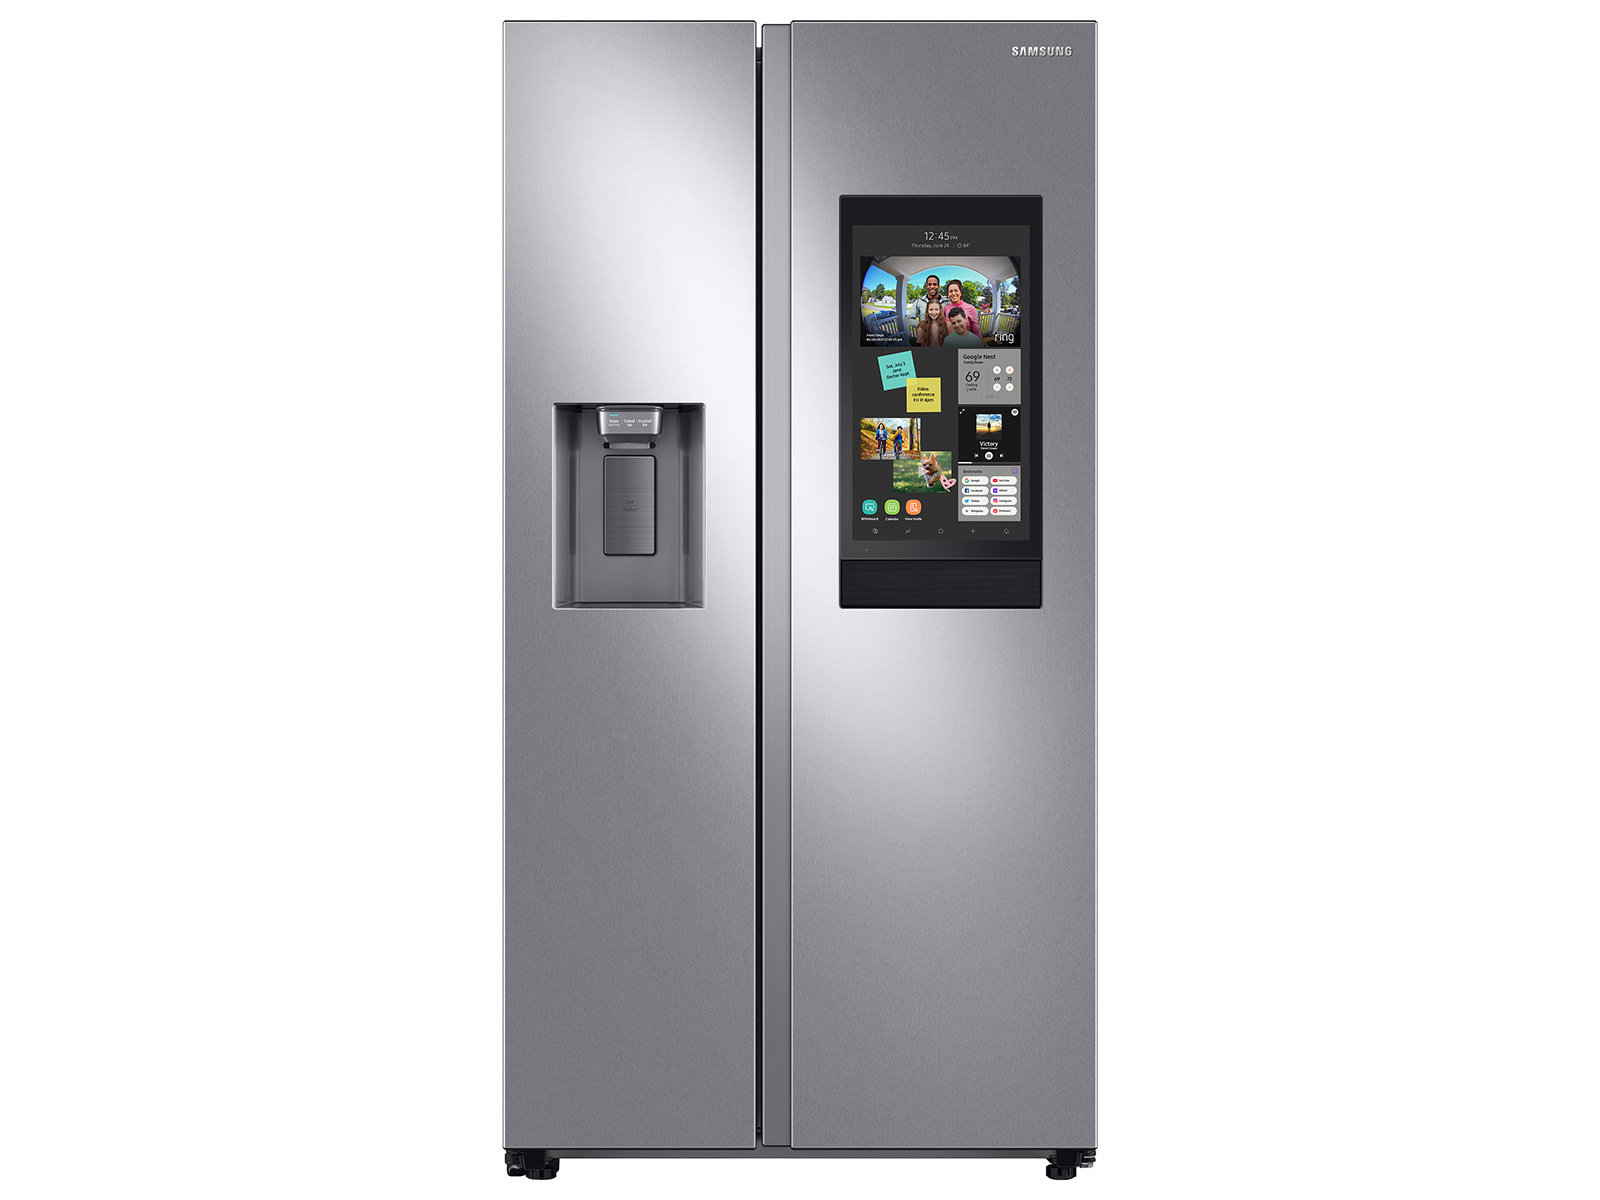 Samsung 22 Cu. ft. Counter Depth Side-By-Side Refrigerator with Family Hub - Stainless Steel RS22T5561SR